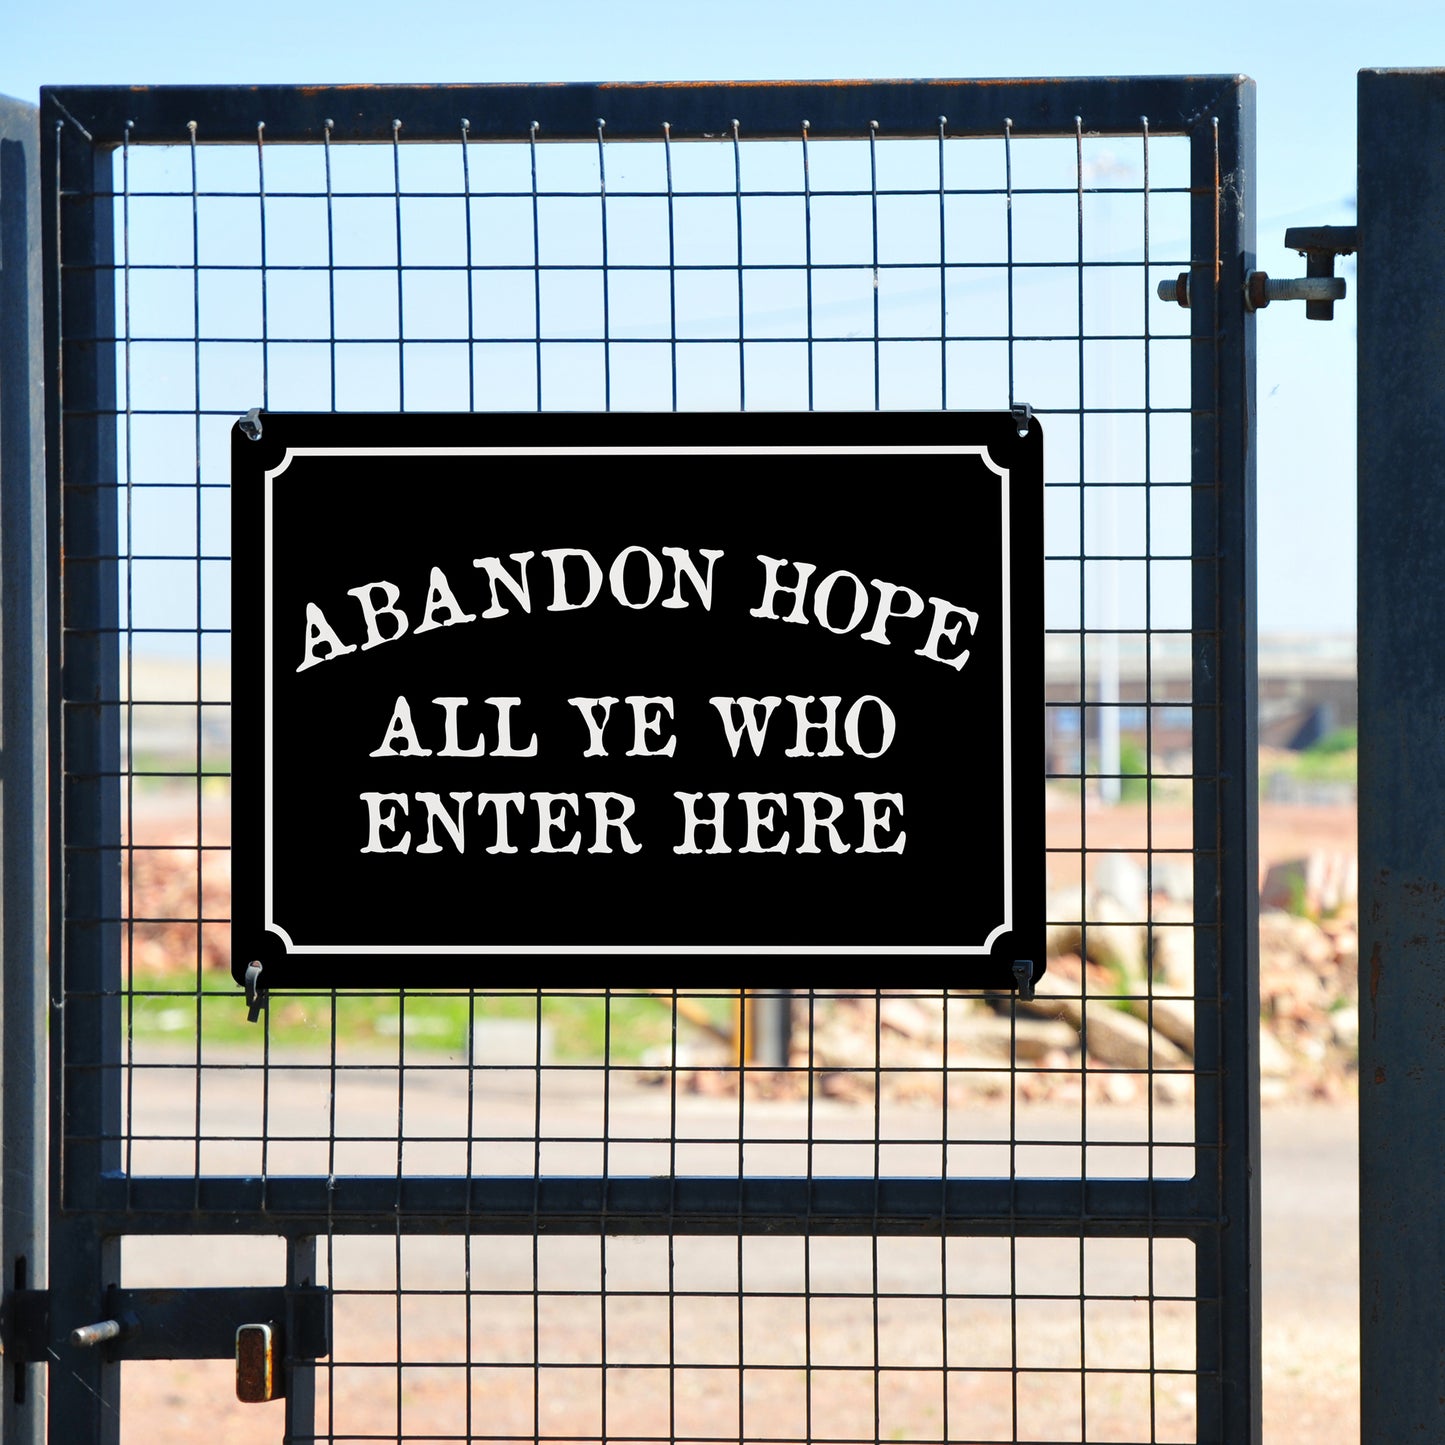 Abandon Hope All Ye Who Enter Here - 8" x 12" Funny Plastic (PVC) Sign (With Pre-Drilled Holes for Easy Mounting)